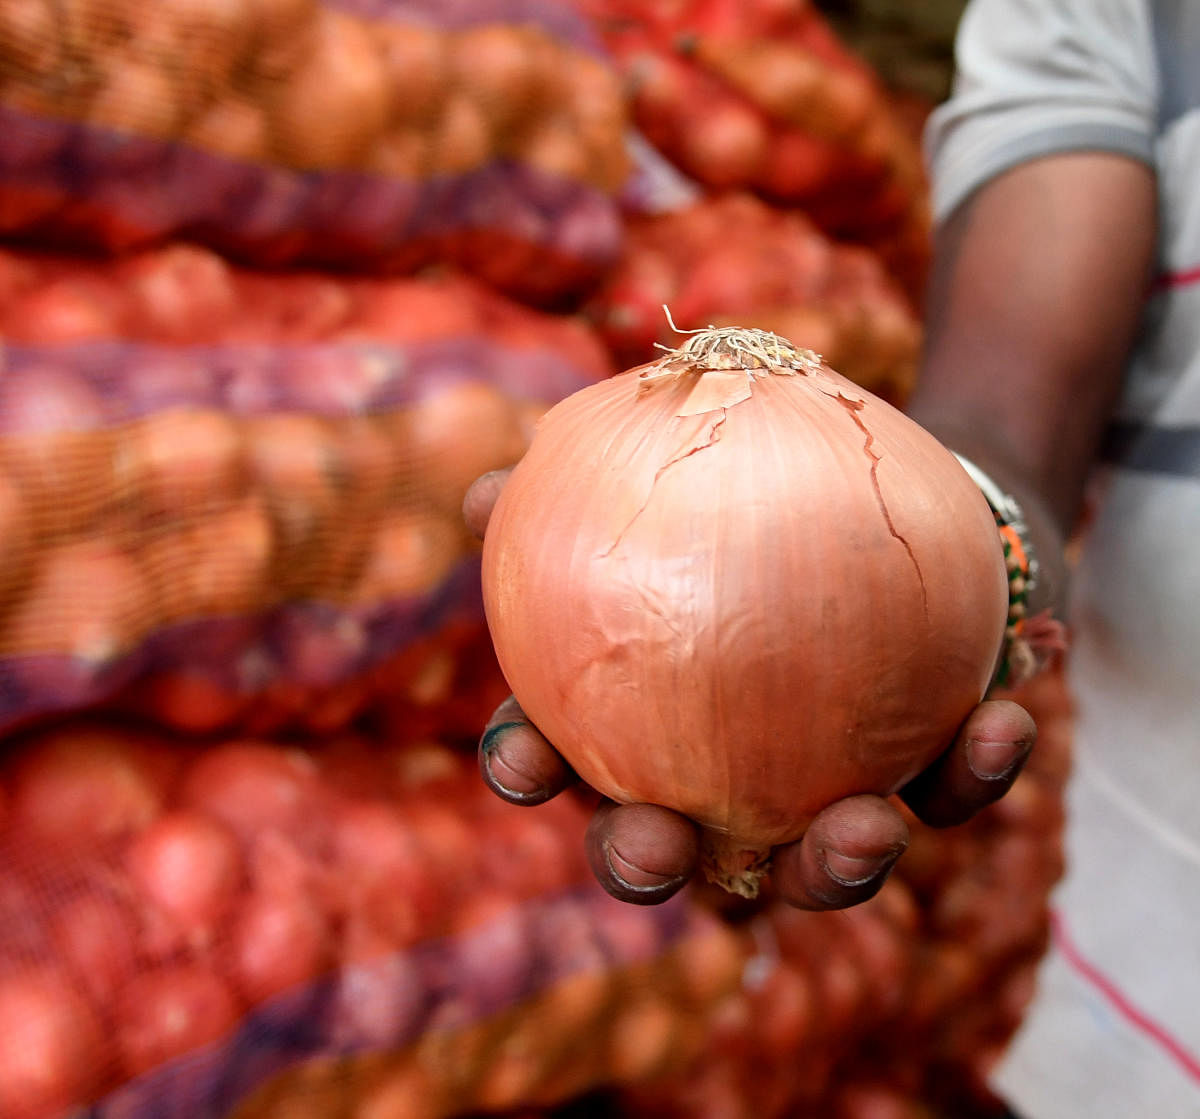 Govt caps stock limit on onion retailers to 2 tons